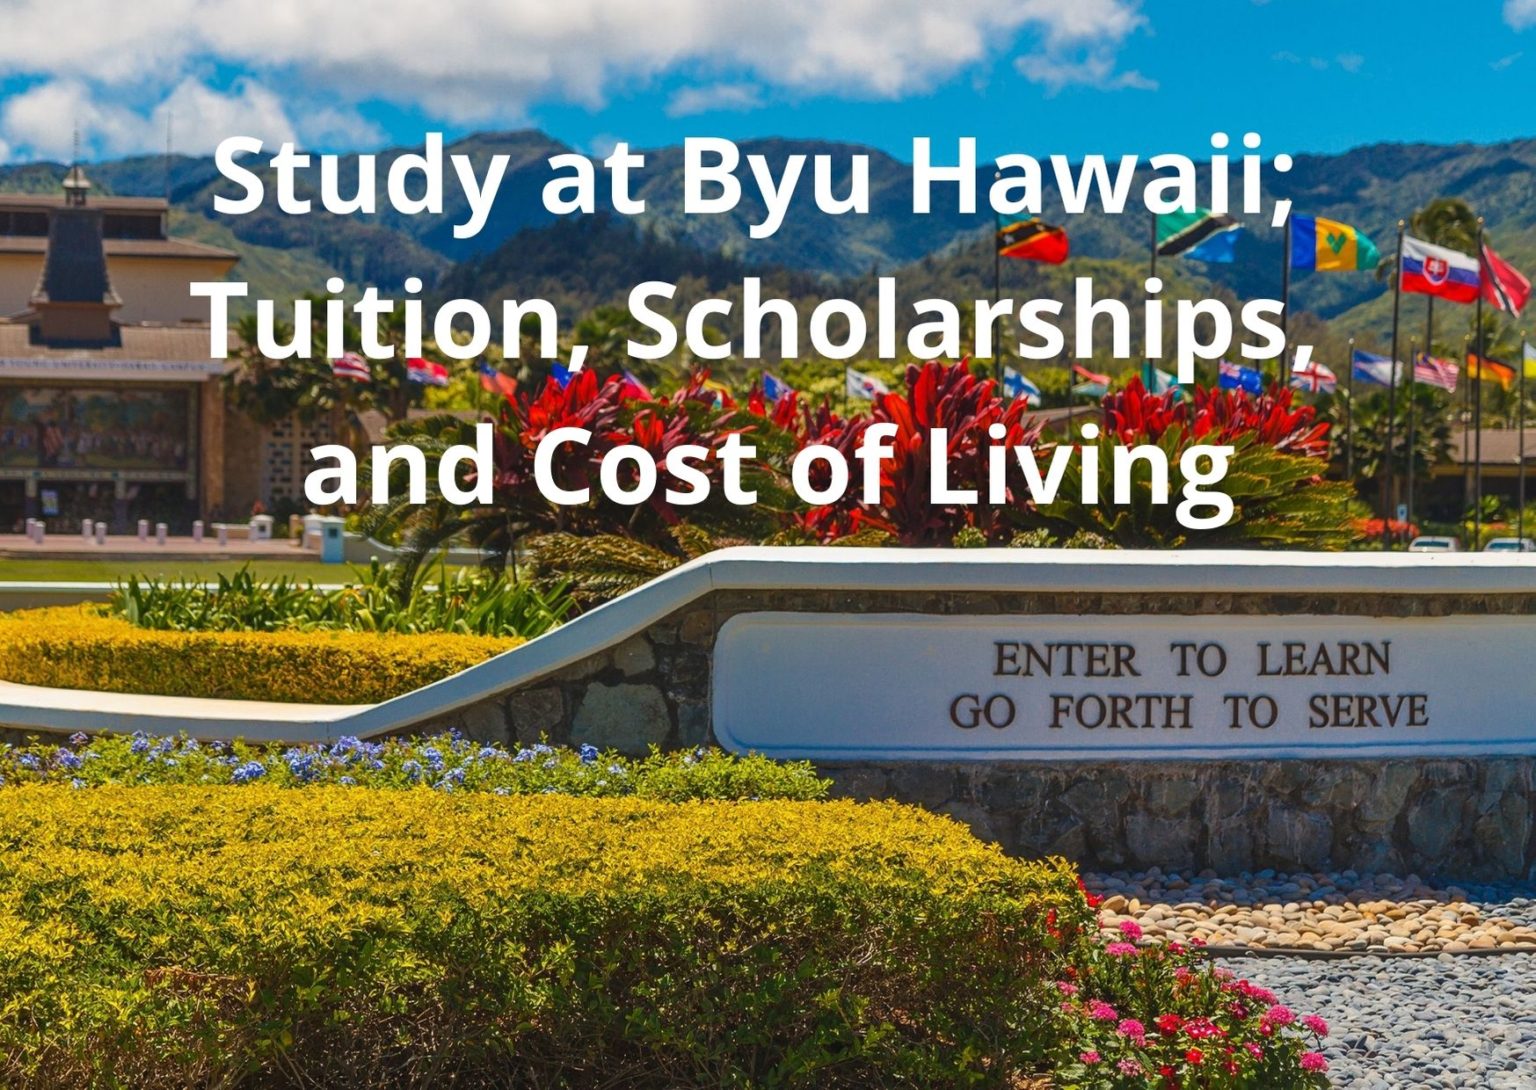 Study at Byu Hawaii; Tuition, Scholarships, and Cost of Living